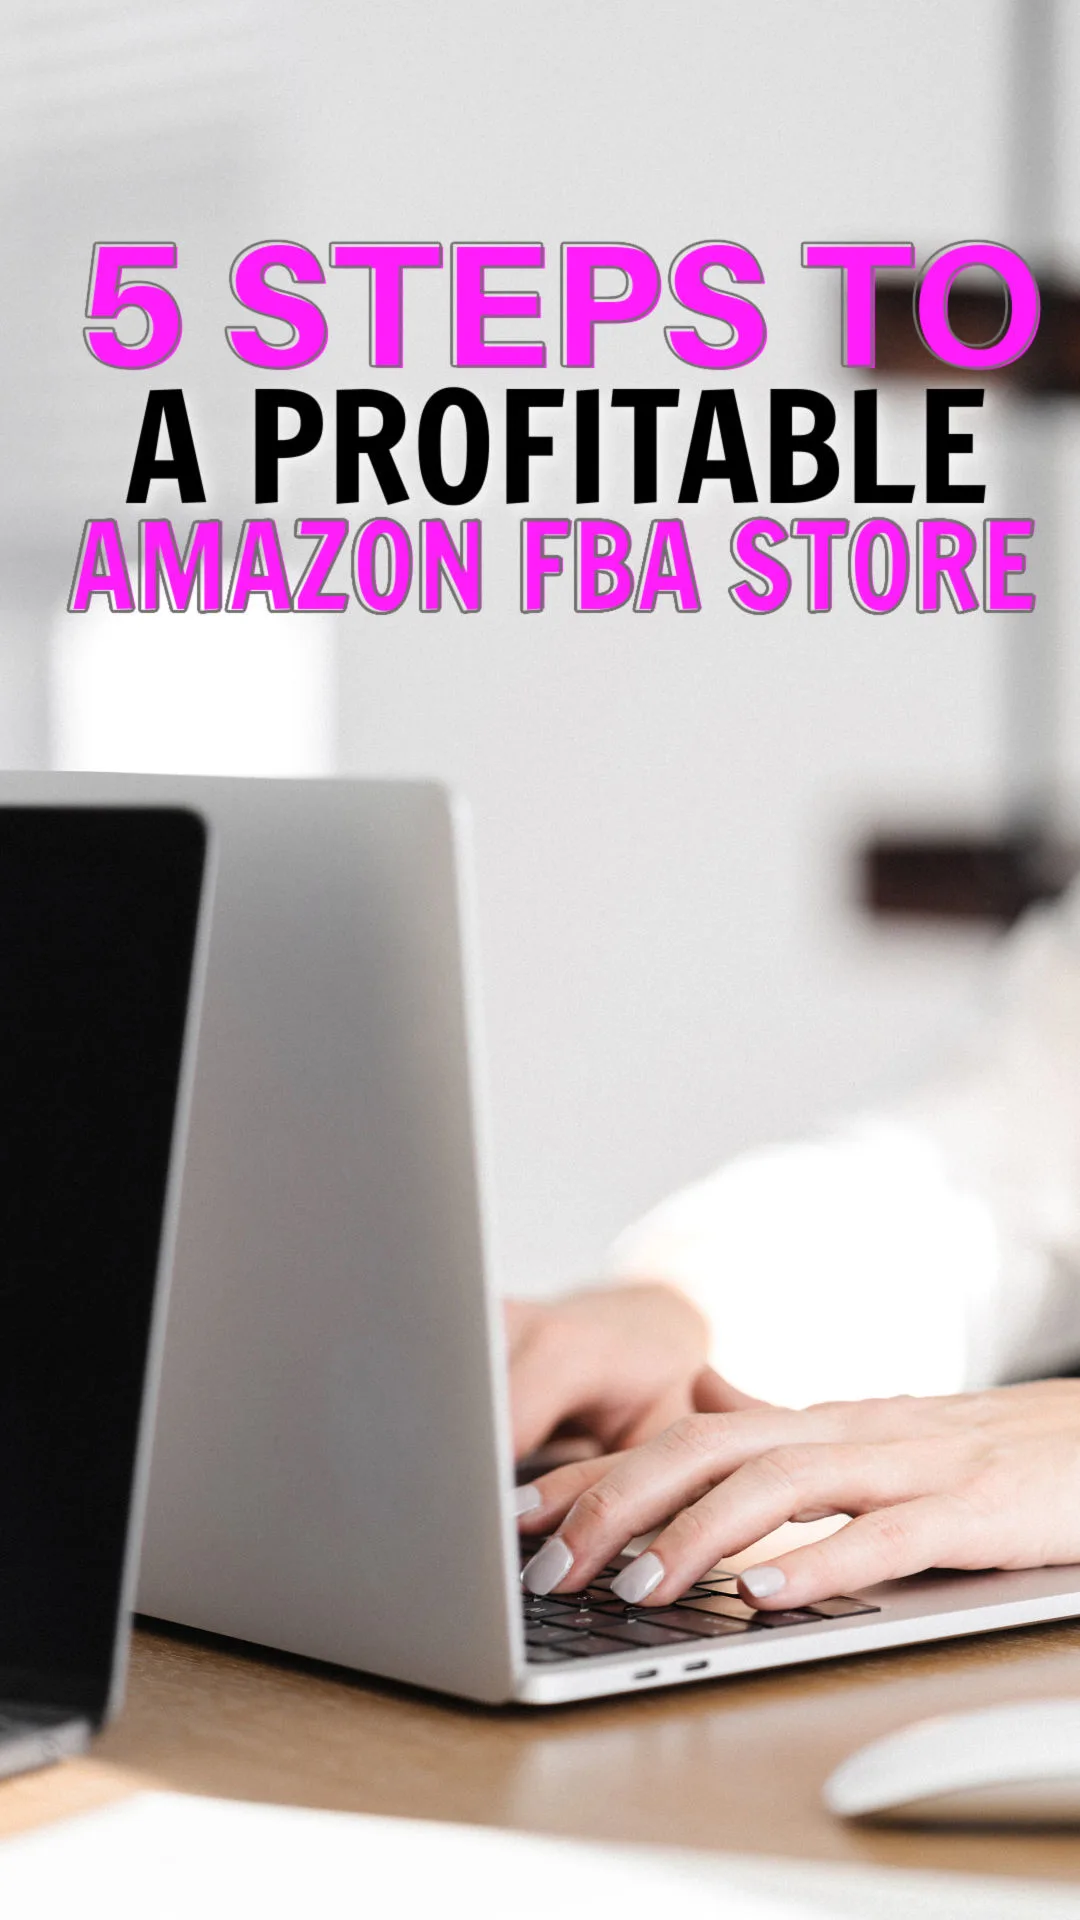 Starting an Amazon FBA Store on a Tight Budget